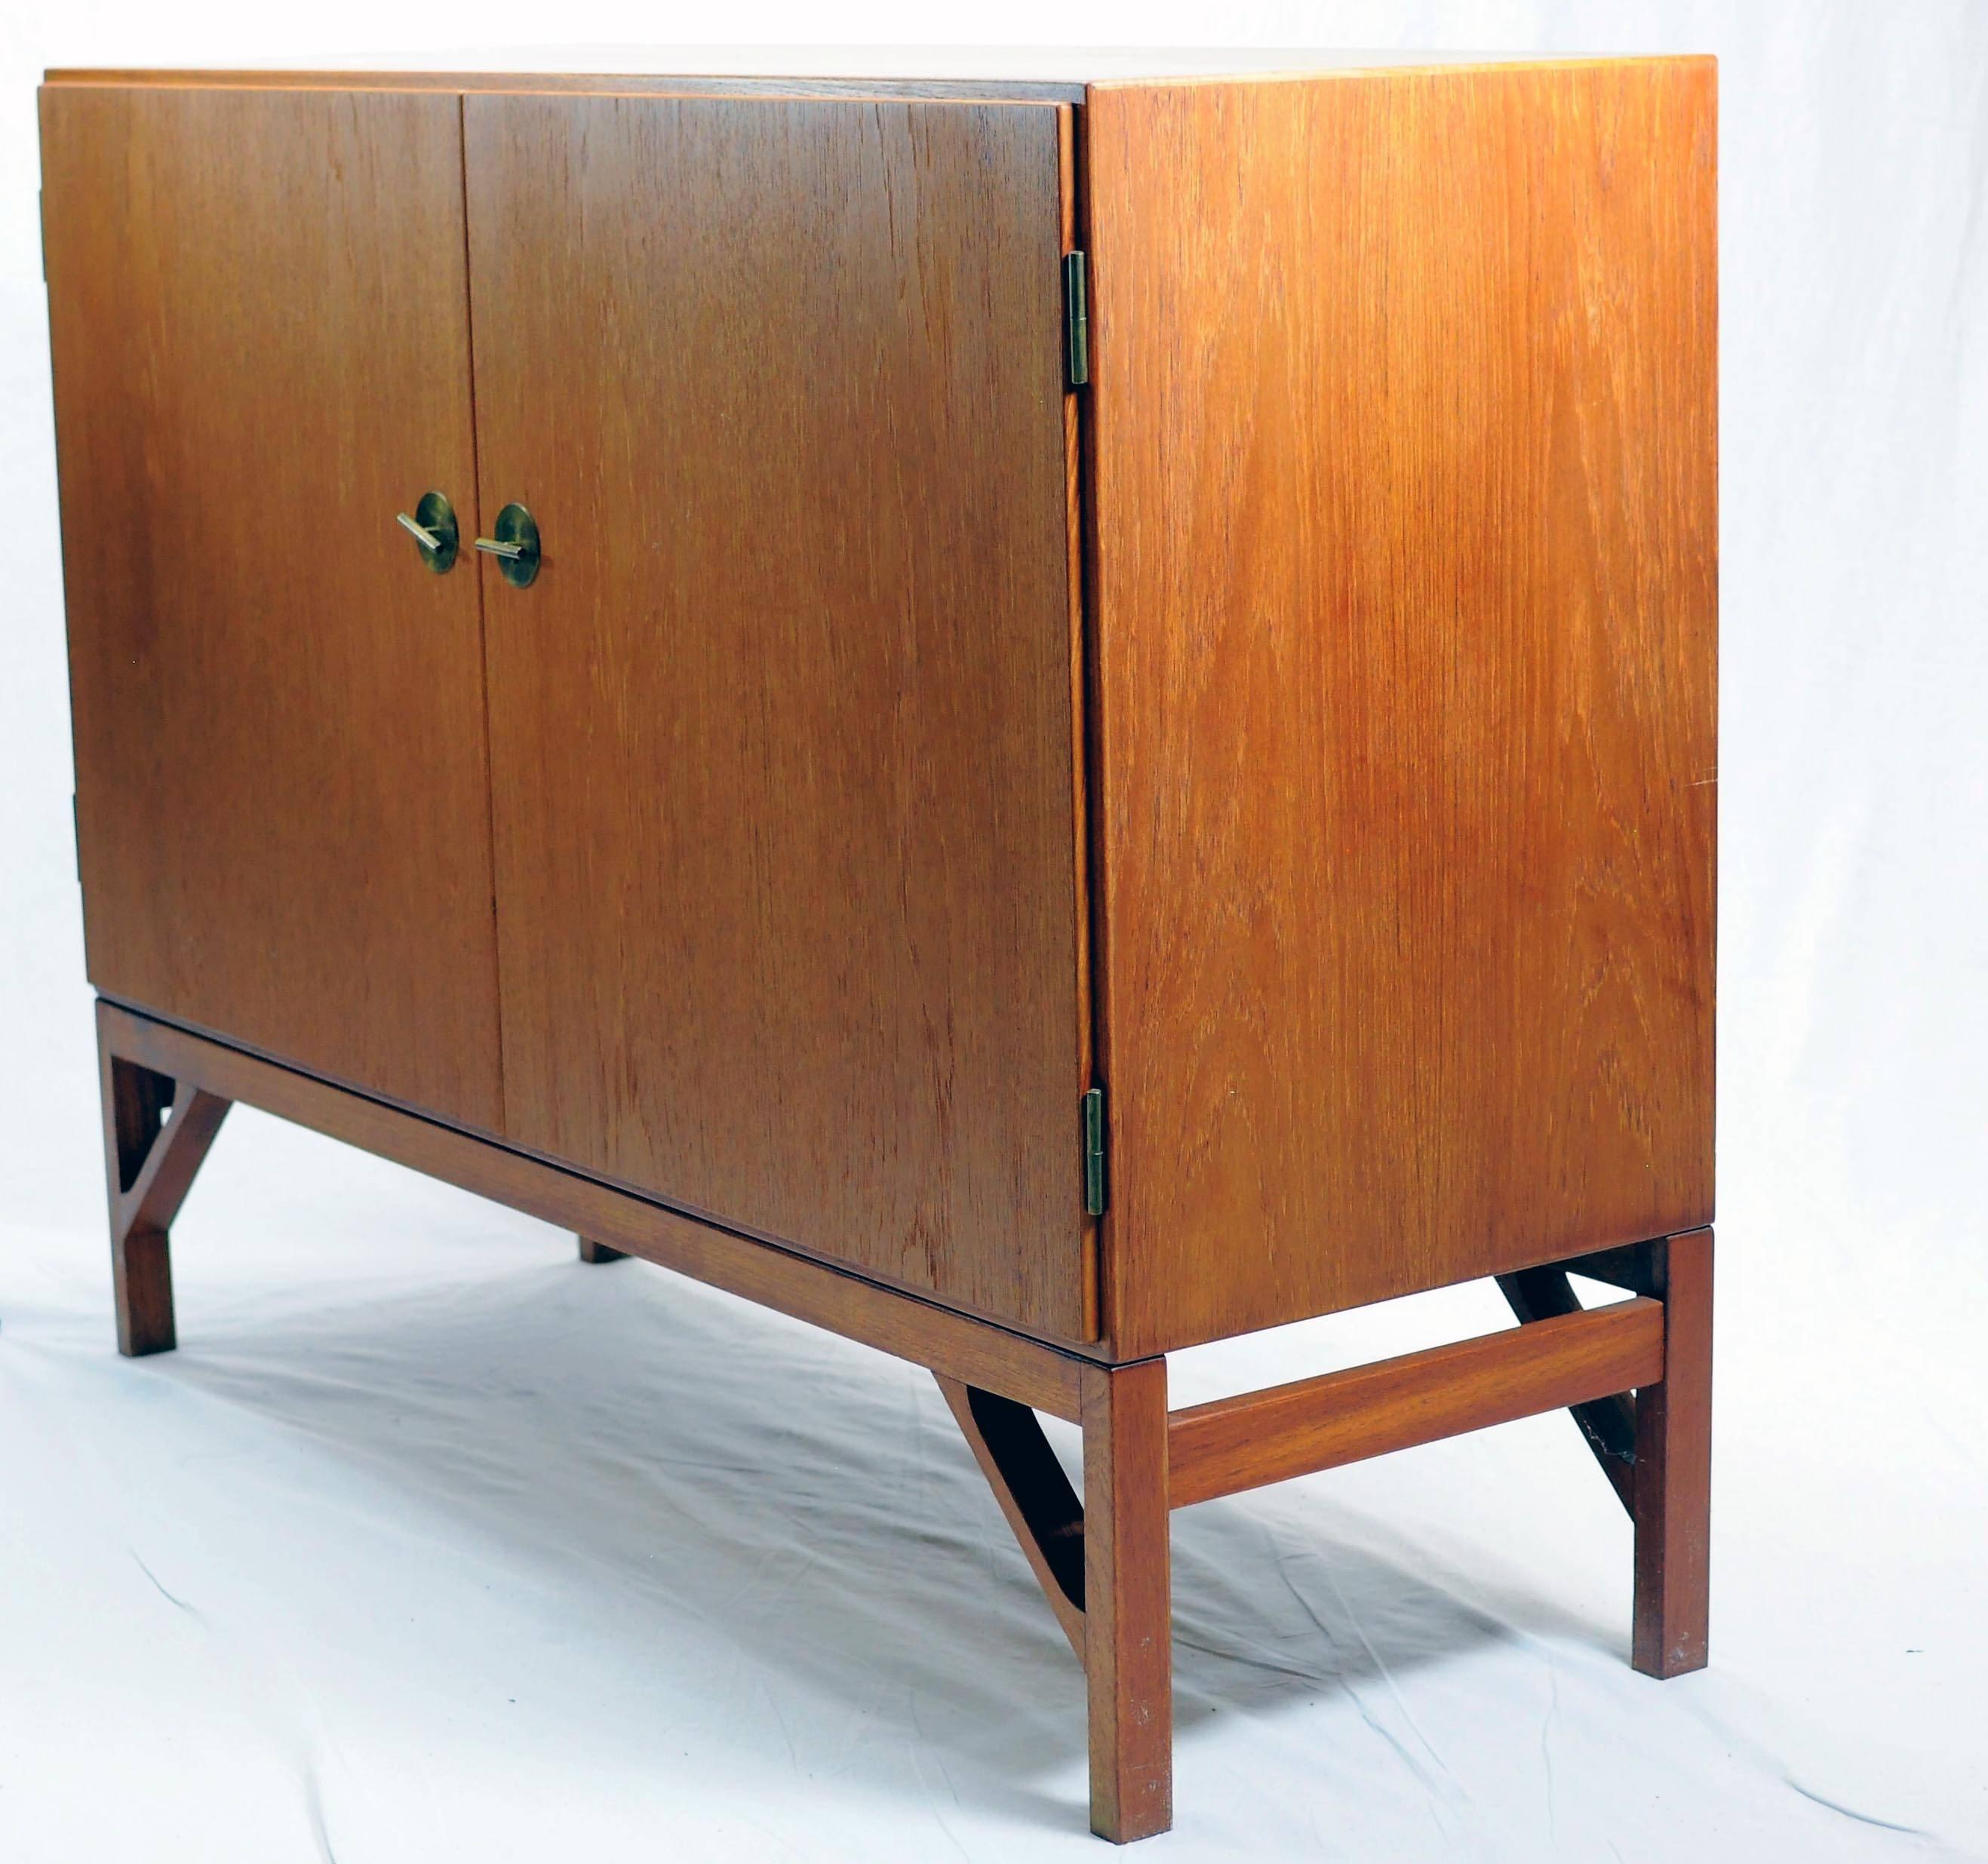 Well crafted Børge Mogensen teak sideboard manufactured by C.M Madsen for FDB.

The spacious sideboard is in very good condition and features front doors decorated with small brass grips and a very spacious inside that can easily be adjusted to